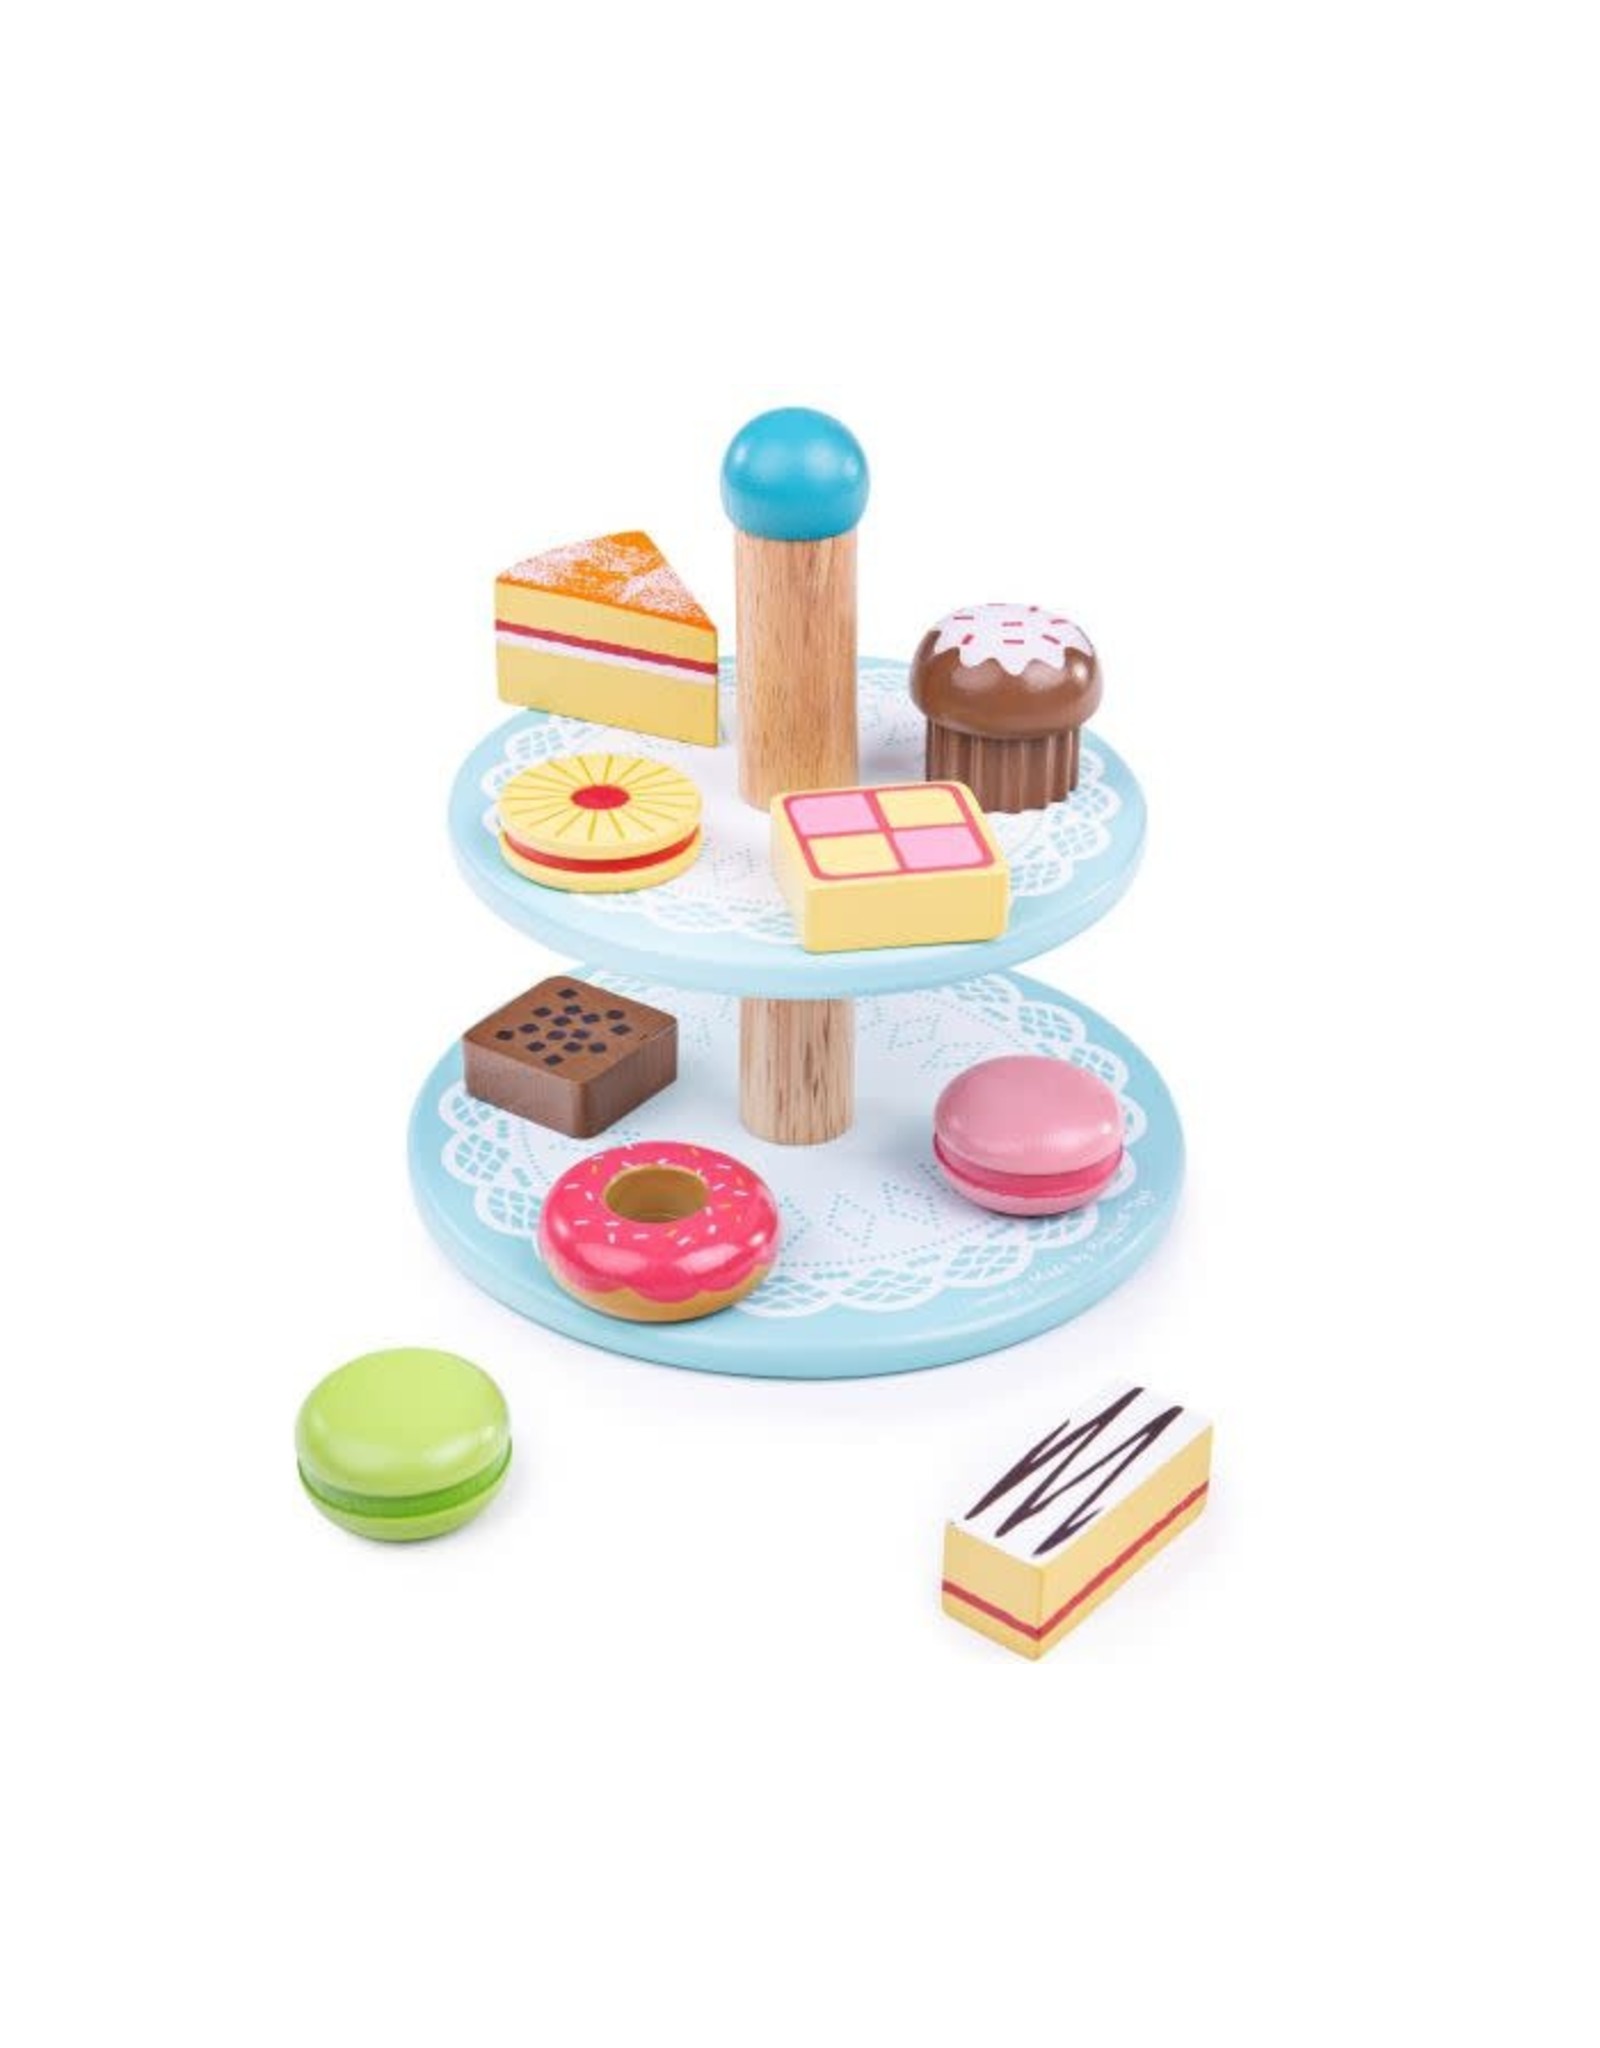 Cake Stand with Cakes